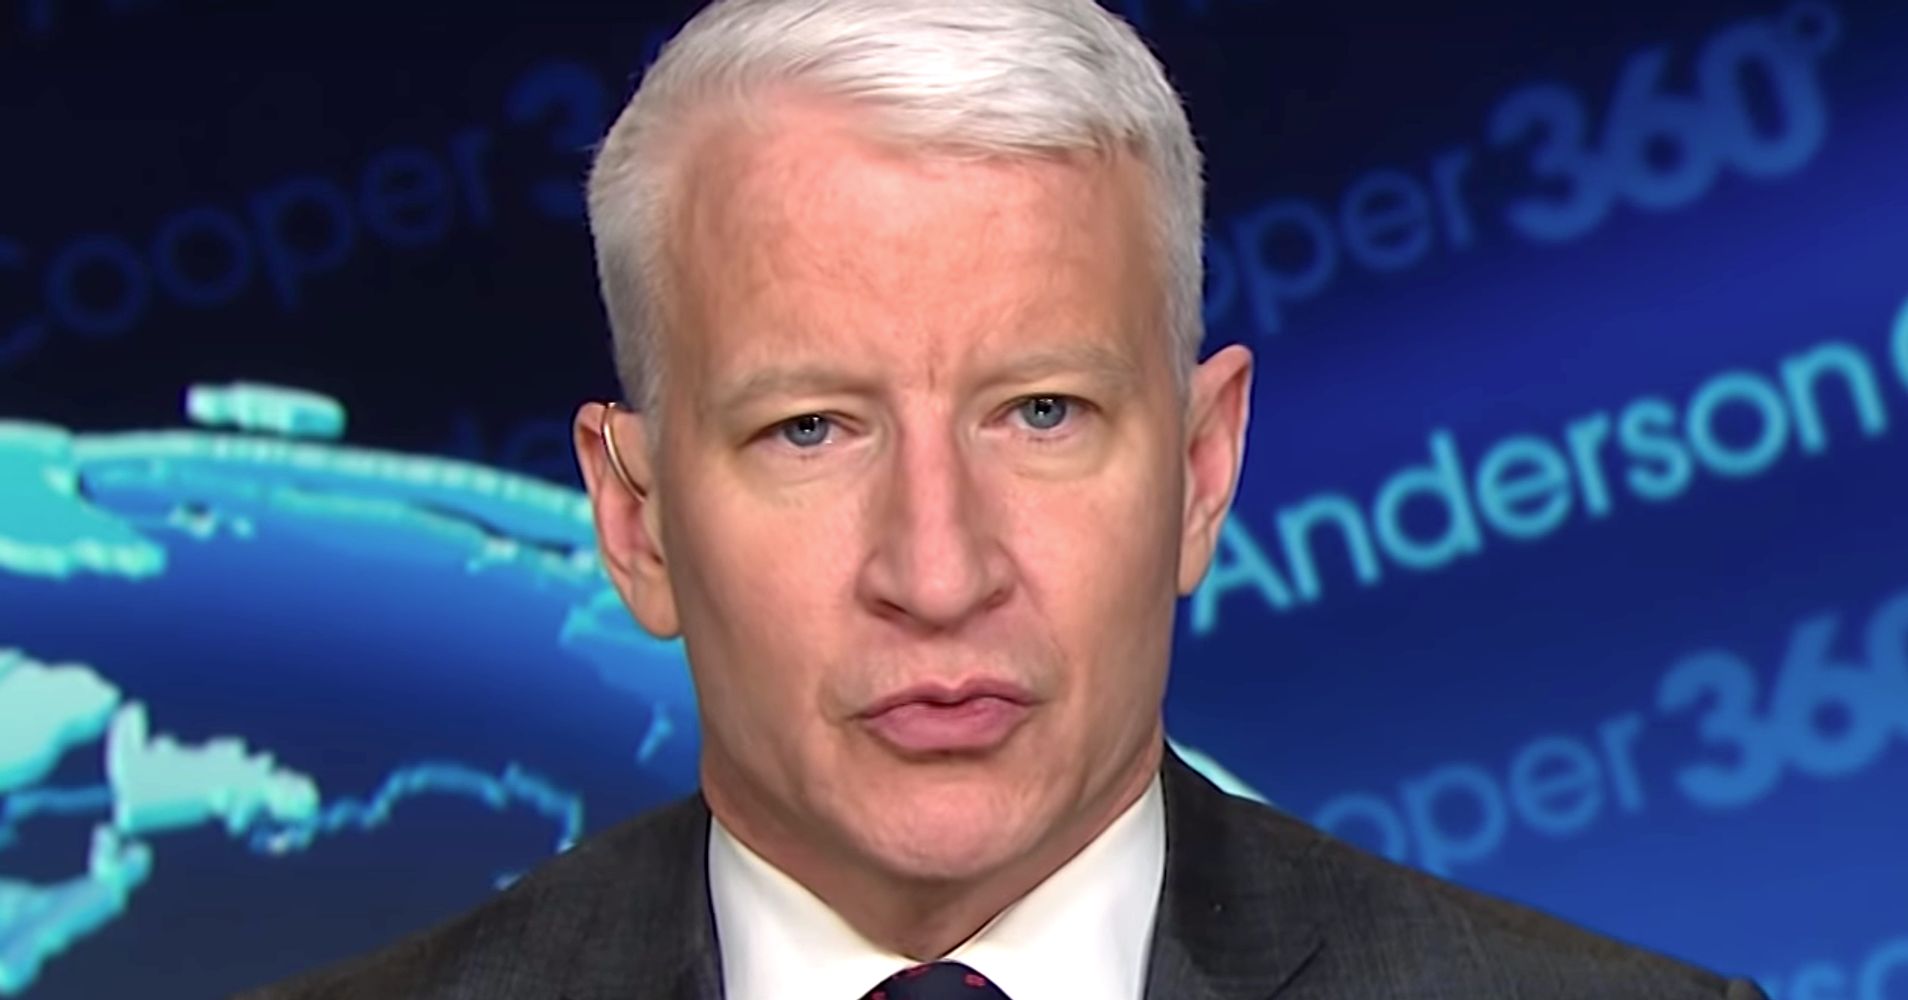 Anderson Cooper Bashes Republican Congressman For Pushing ‘Shadowy Conspiracy' About ...